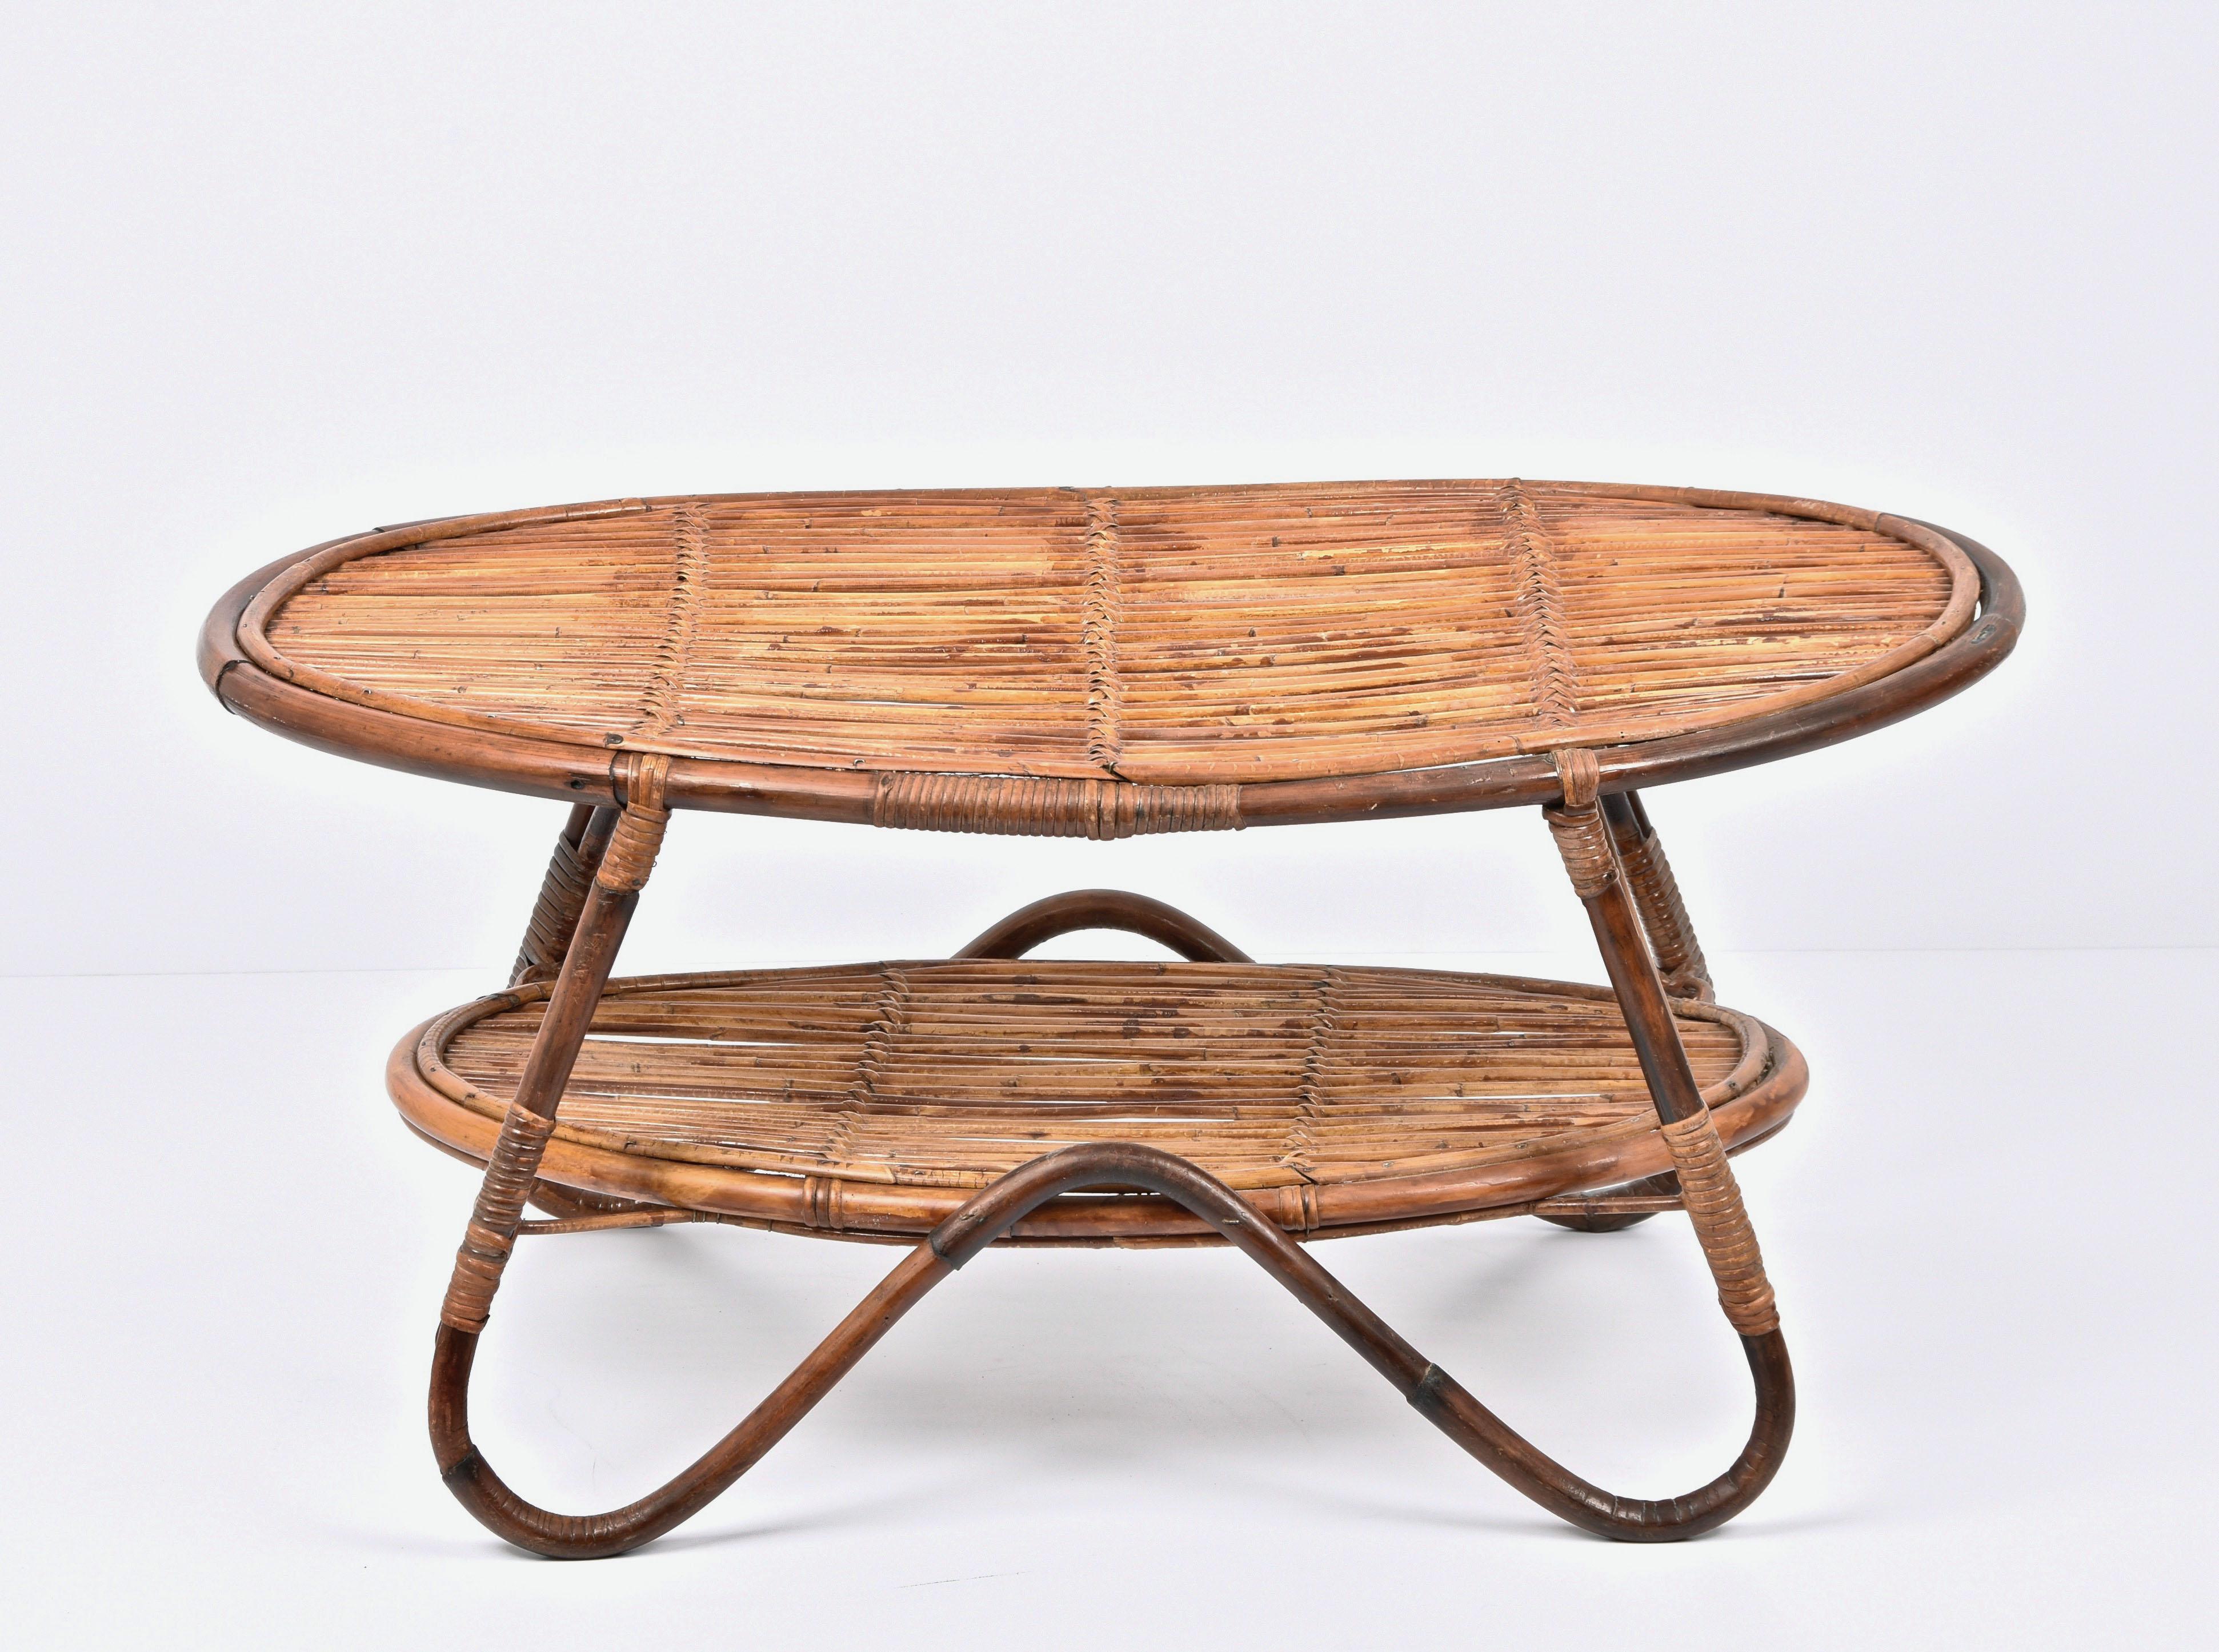 Midcentury Italian Oval Rattan and Bamboo Two Levels Coffee Table, 1950s For Sale 8